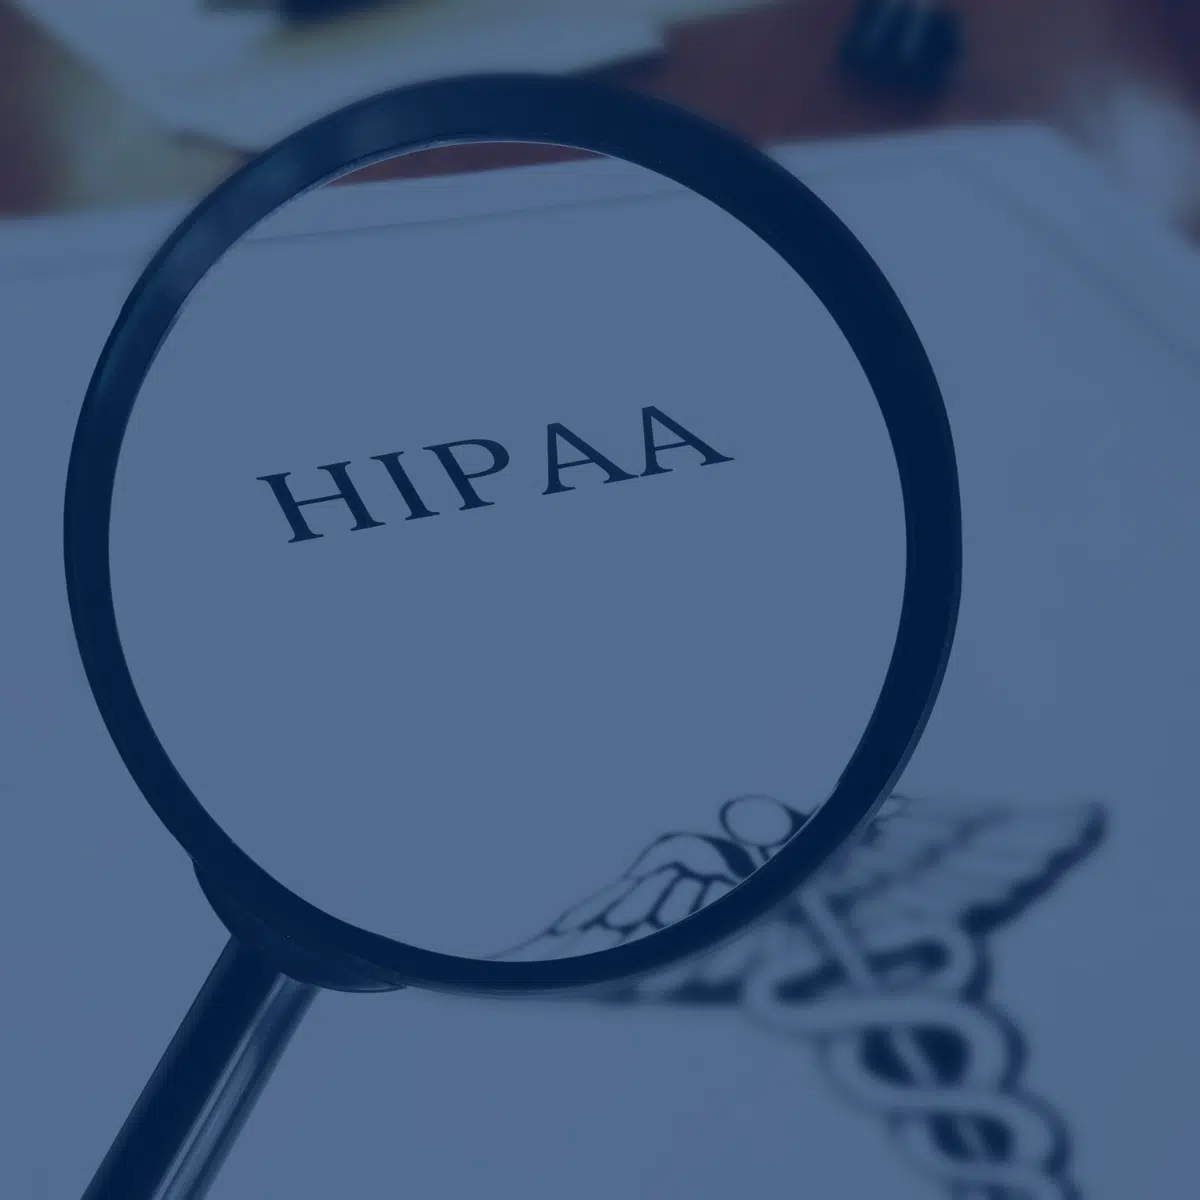 Forensis' Digital Medical Records Services are both HIPAA Certified and Compliant